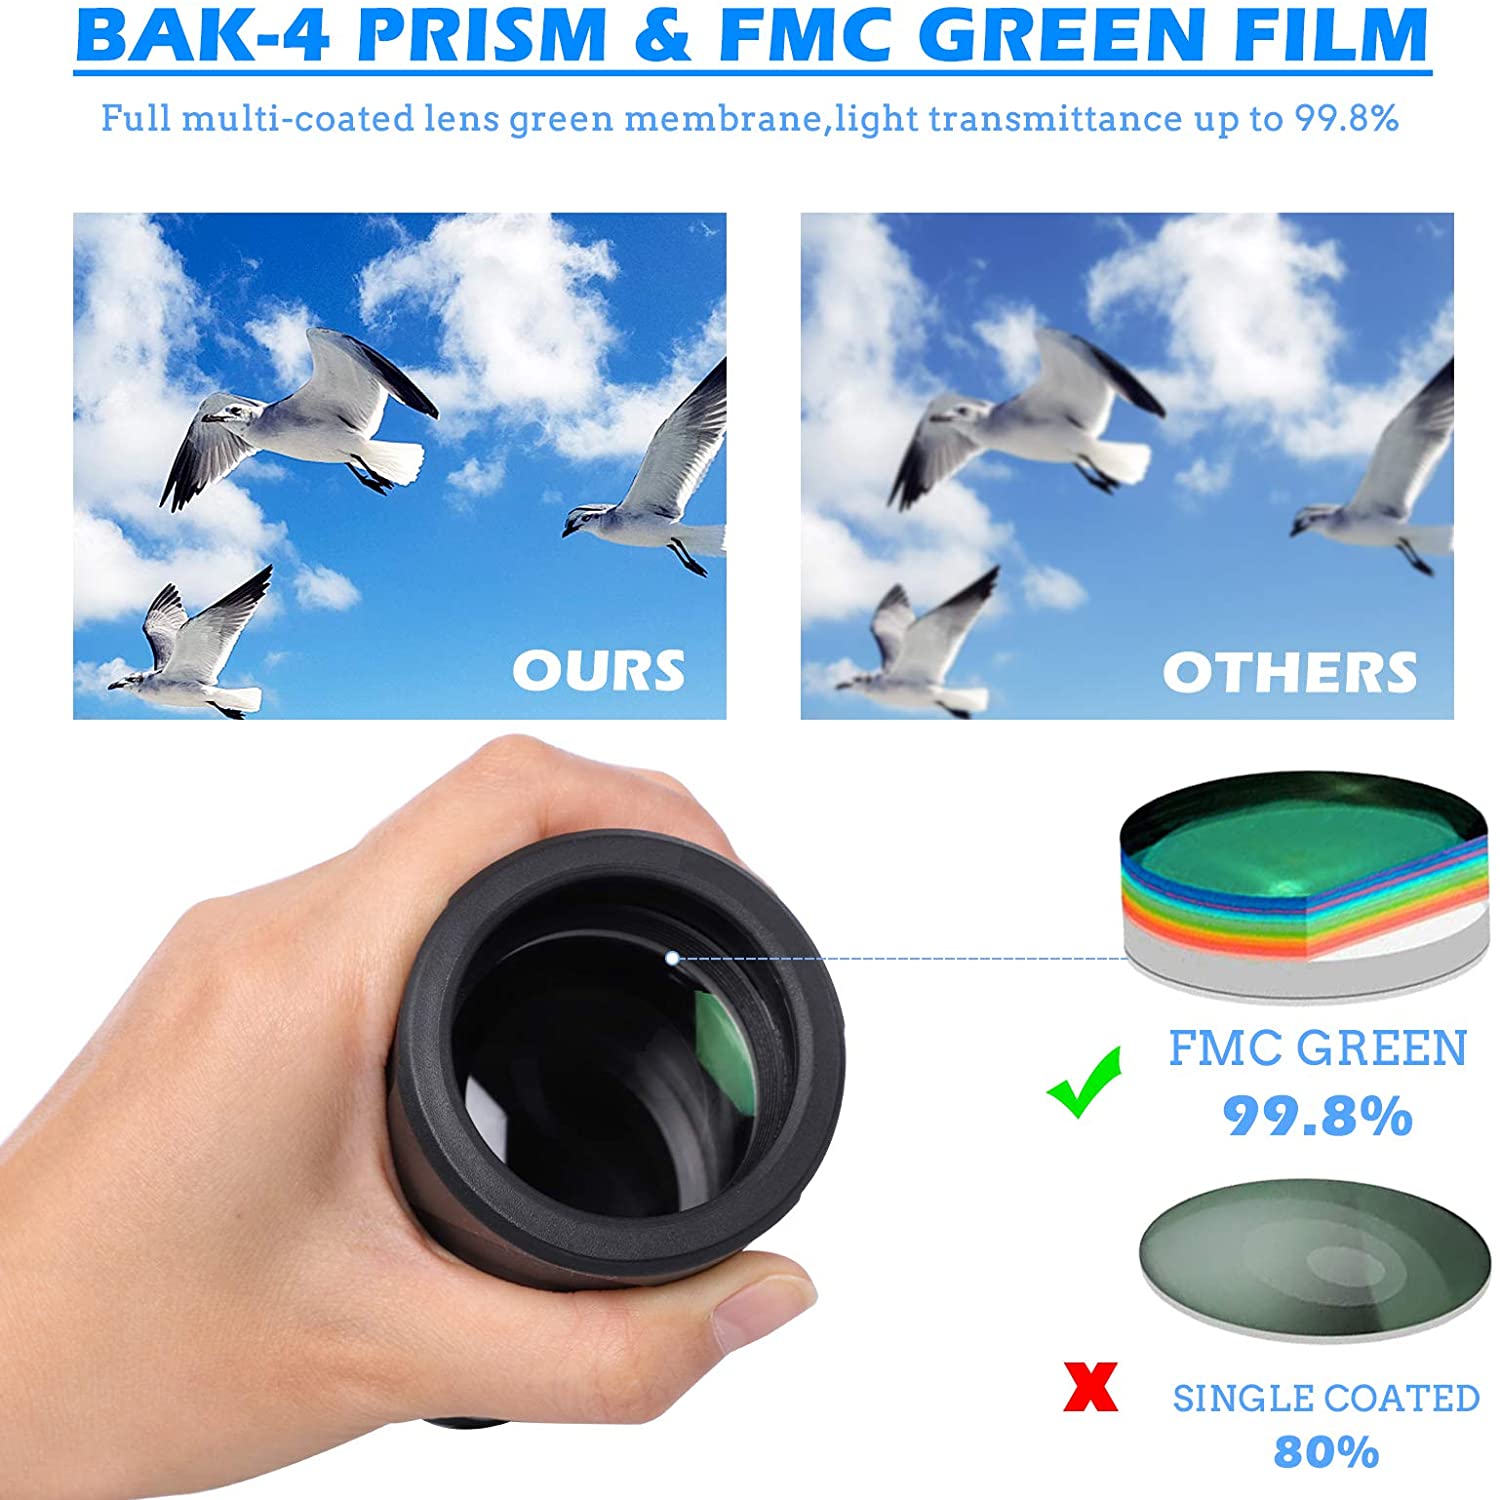 Stream 10X42 FMC Lens Compact Monocular Telescope for Adults